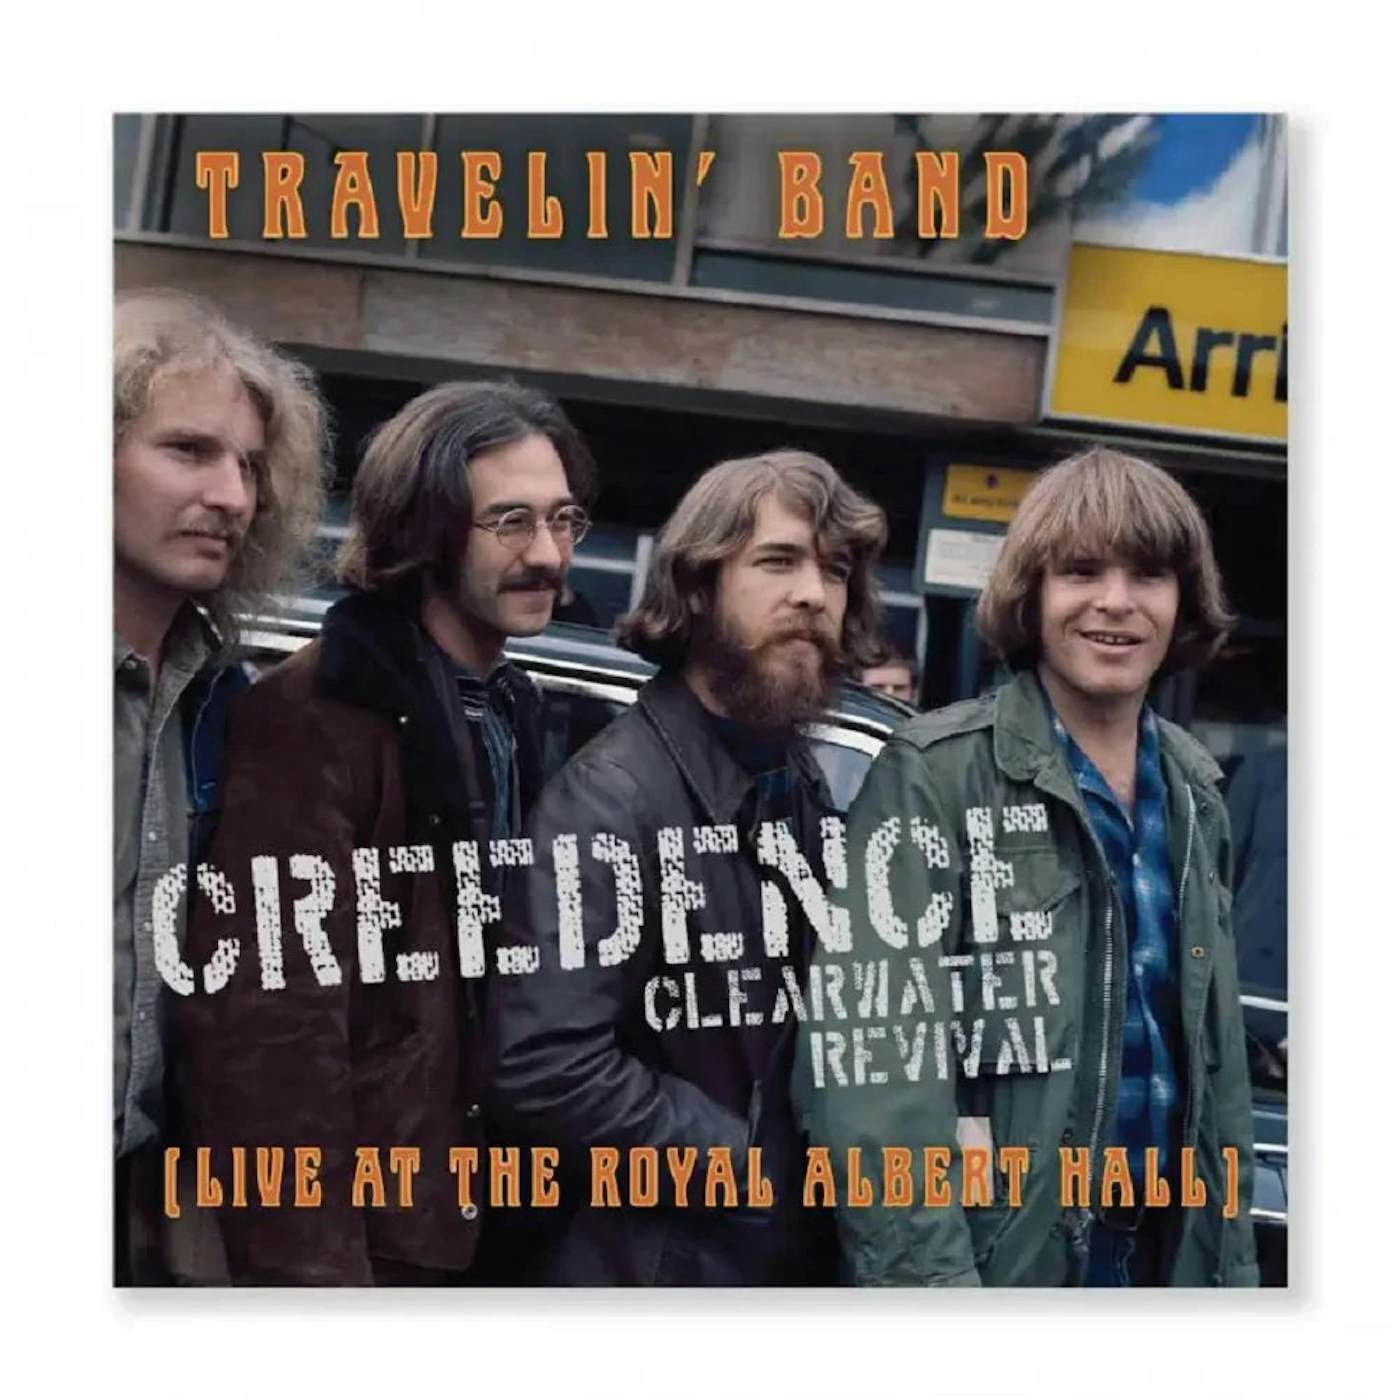 Creedence Clearwater Revival - Travelin' Band 7"